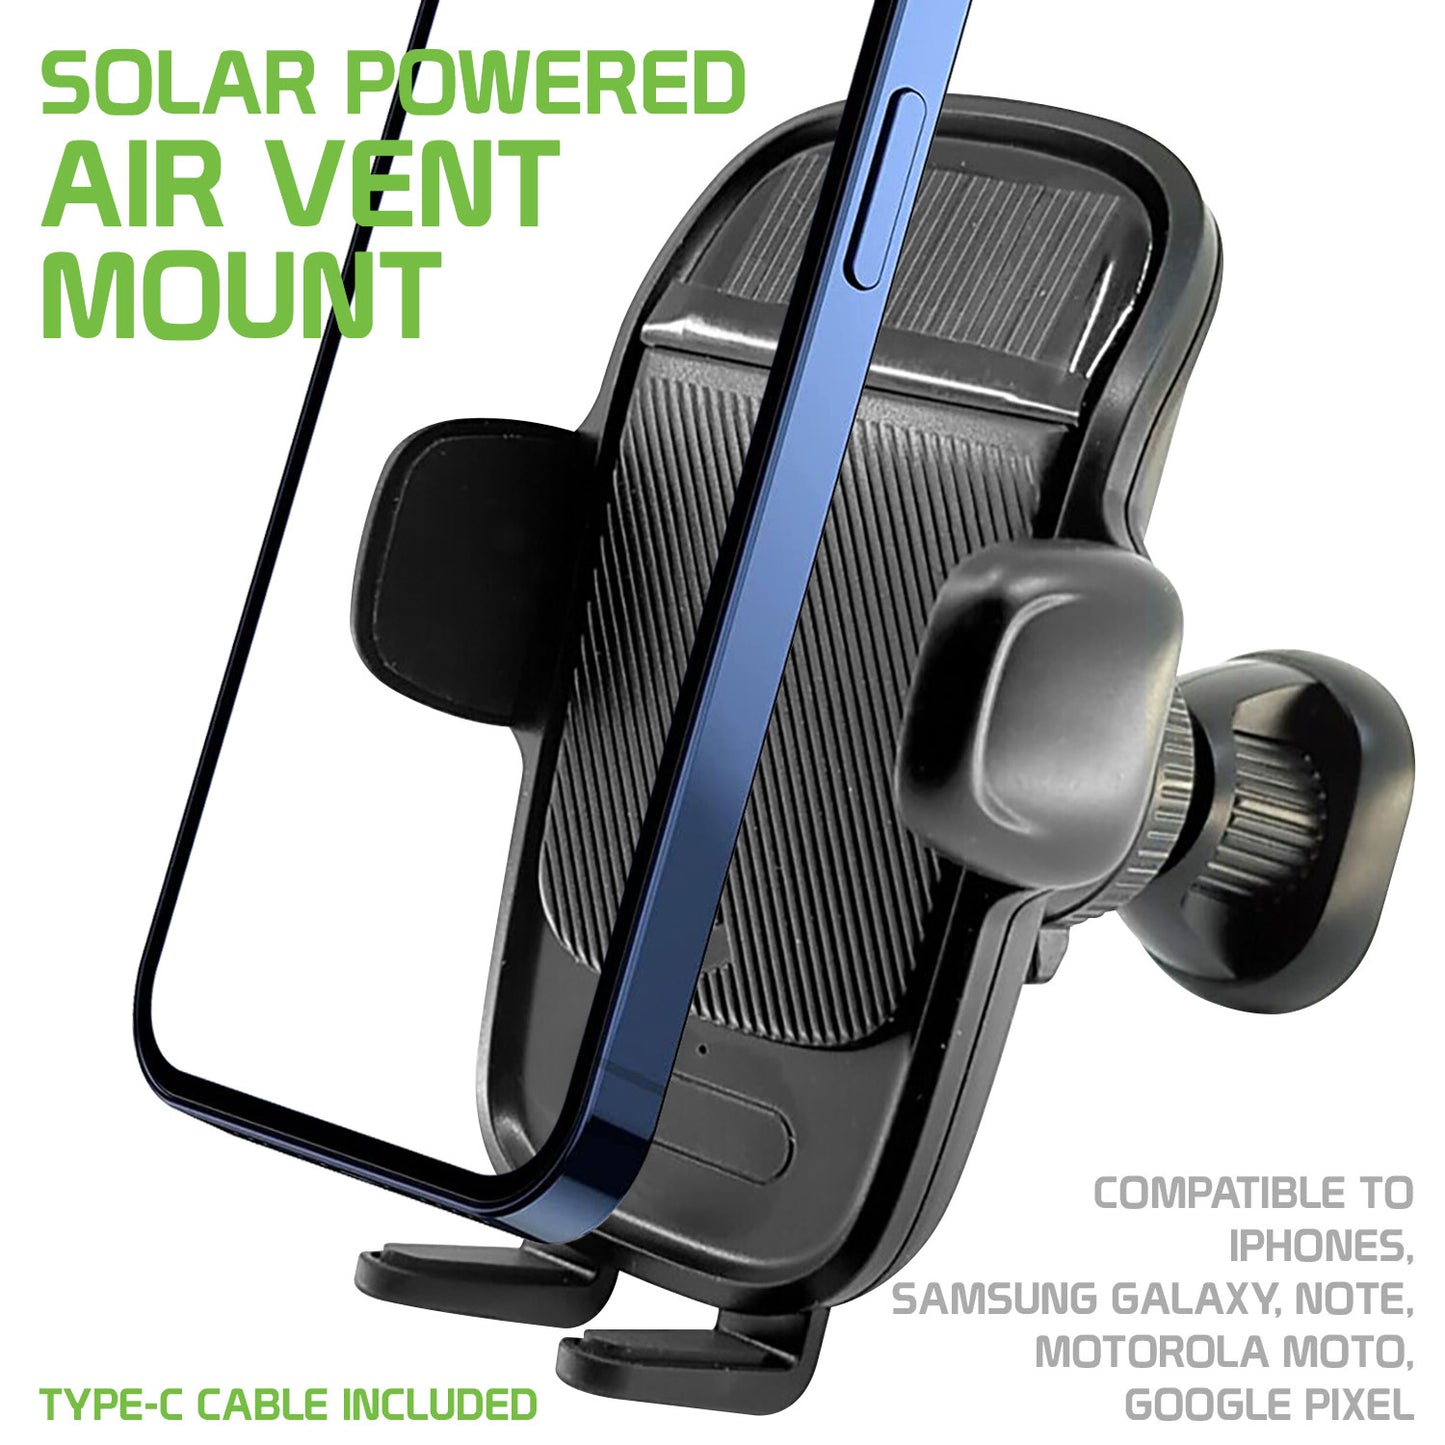 Solar Powered Air Vent Mount With 360 Degree Rotation, Auto touch Release and Lock Cradle (Type-C cable Included) Compatible to iPhones Samsung Galaxy, Note, Motorola Moto, Google Pixel